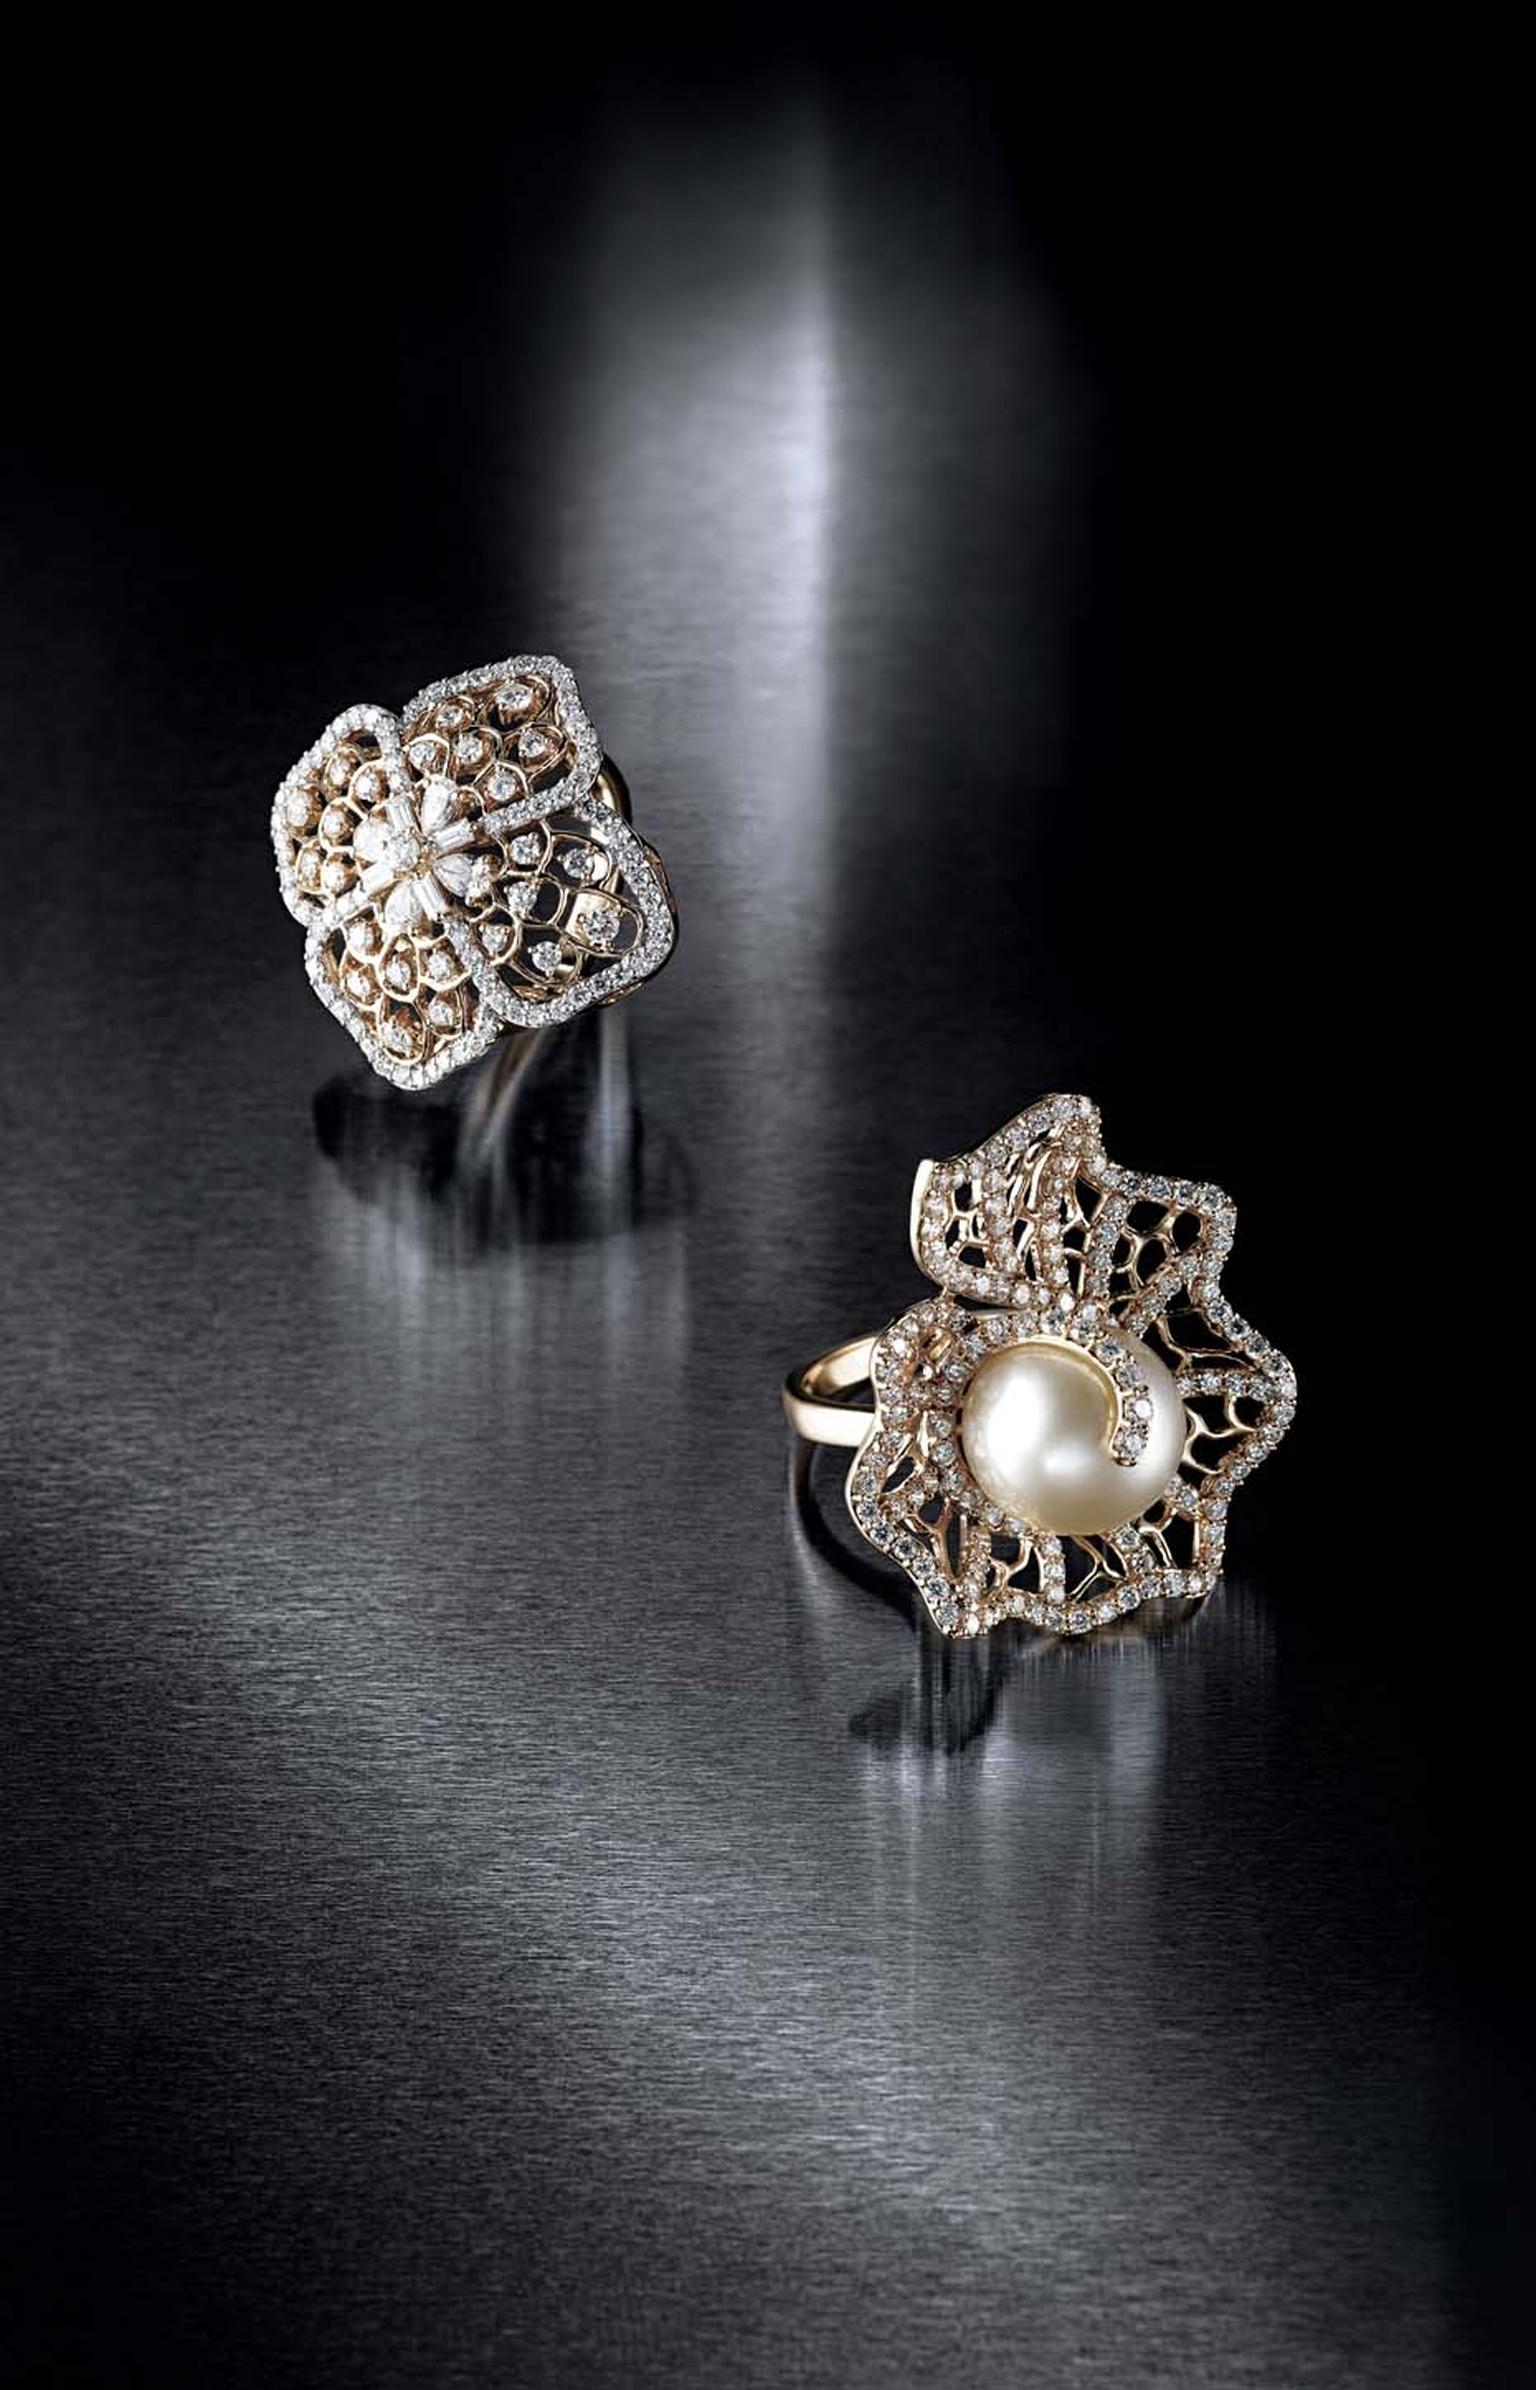 Farah Khan for Tanishq diamond rings. Pictured on the right is an all-diamond Jaali (meshed) ring with a pearl centre accented with diamonds, while on the left is an all-diamond floral ring set in yellow gold.